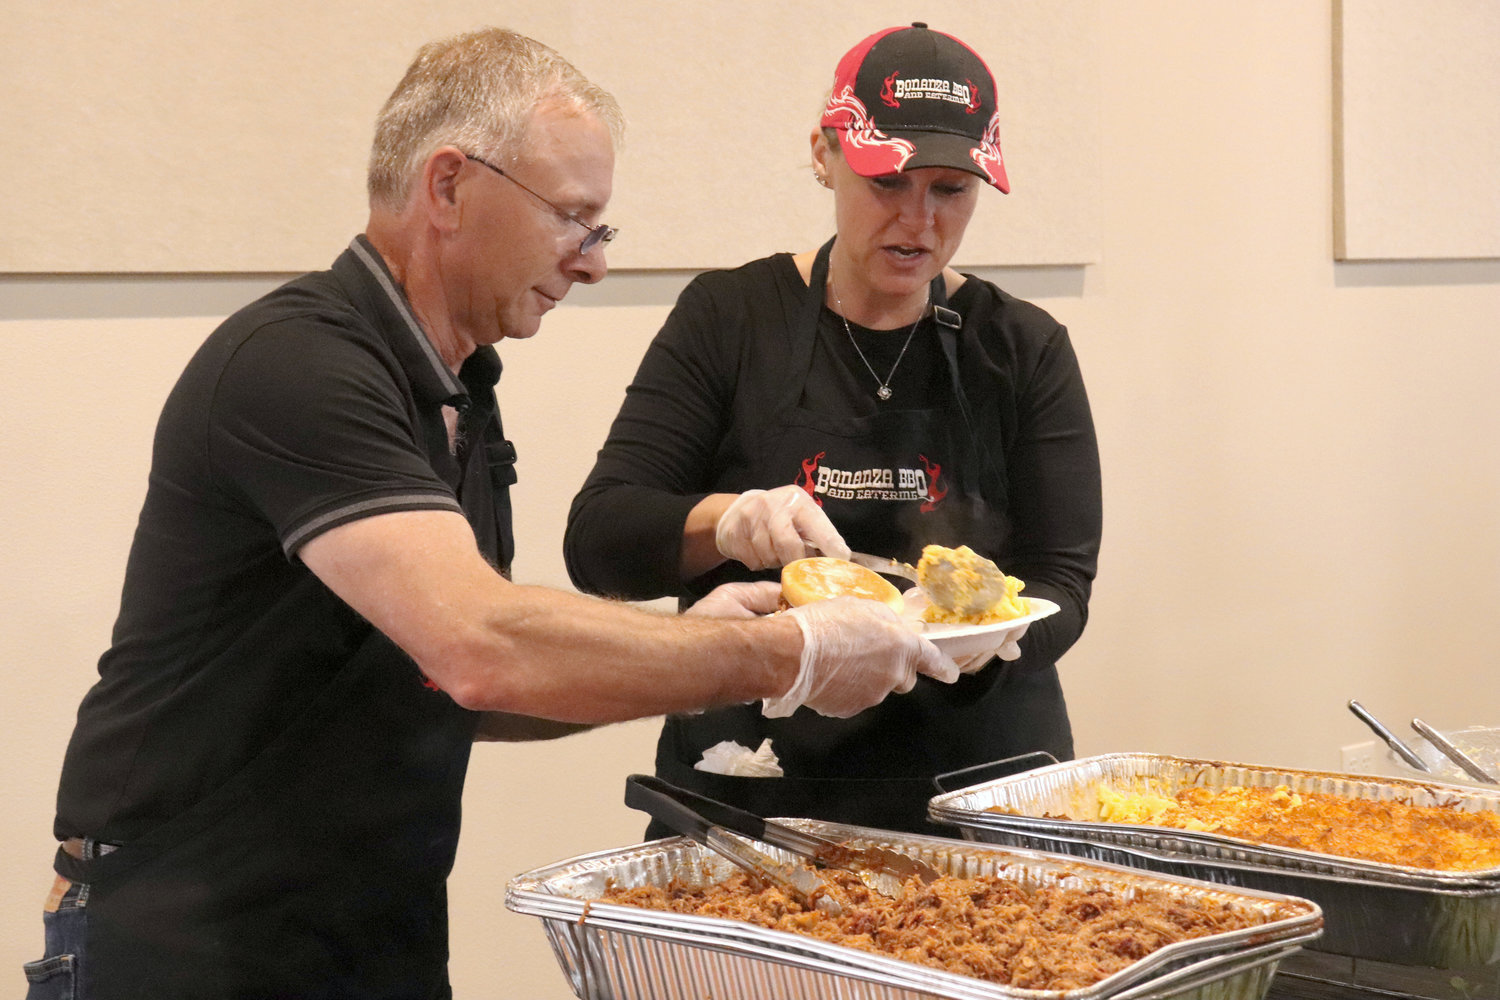 Chris Gorton and Evie Degravelles of Bonanza BBQ & Catering dish up a plate of food during the Rob Fuller Top 25 Scholarship Luncheon in Chehalis in Monday.